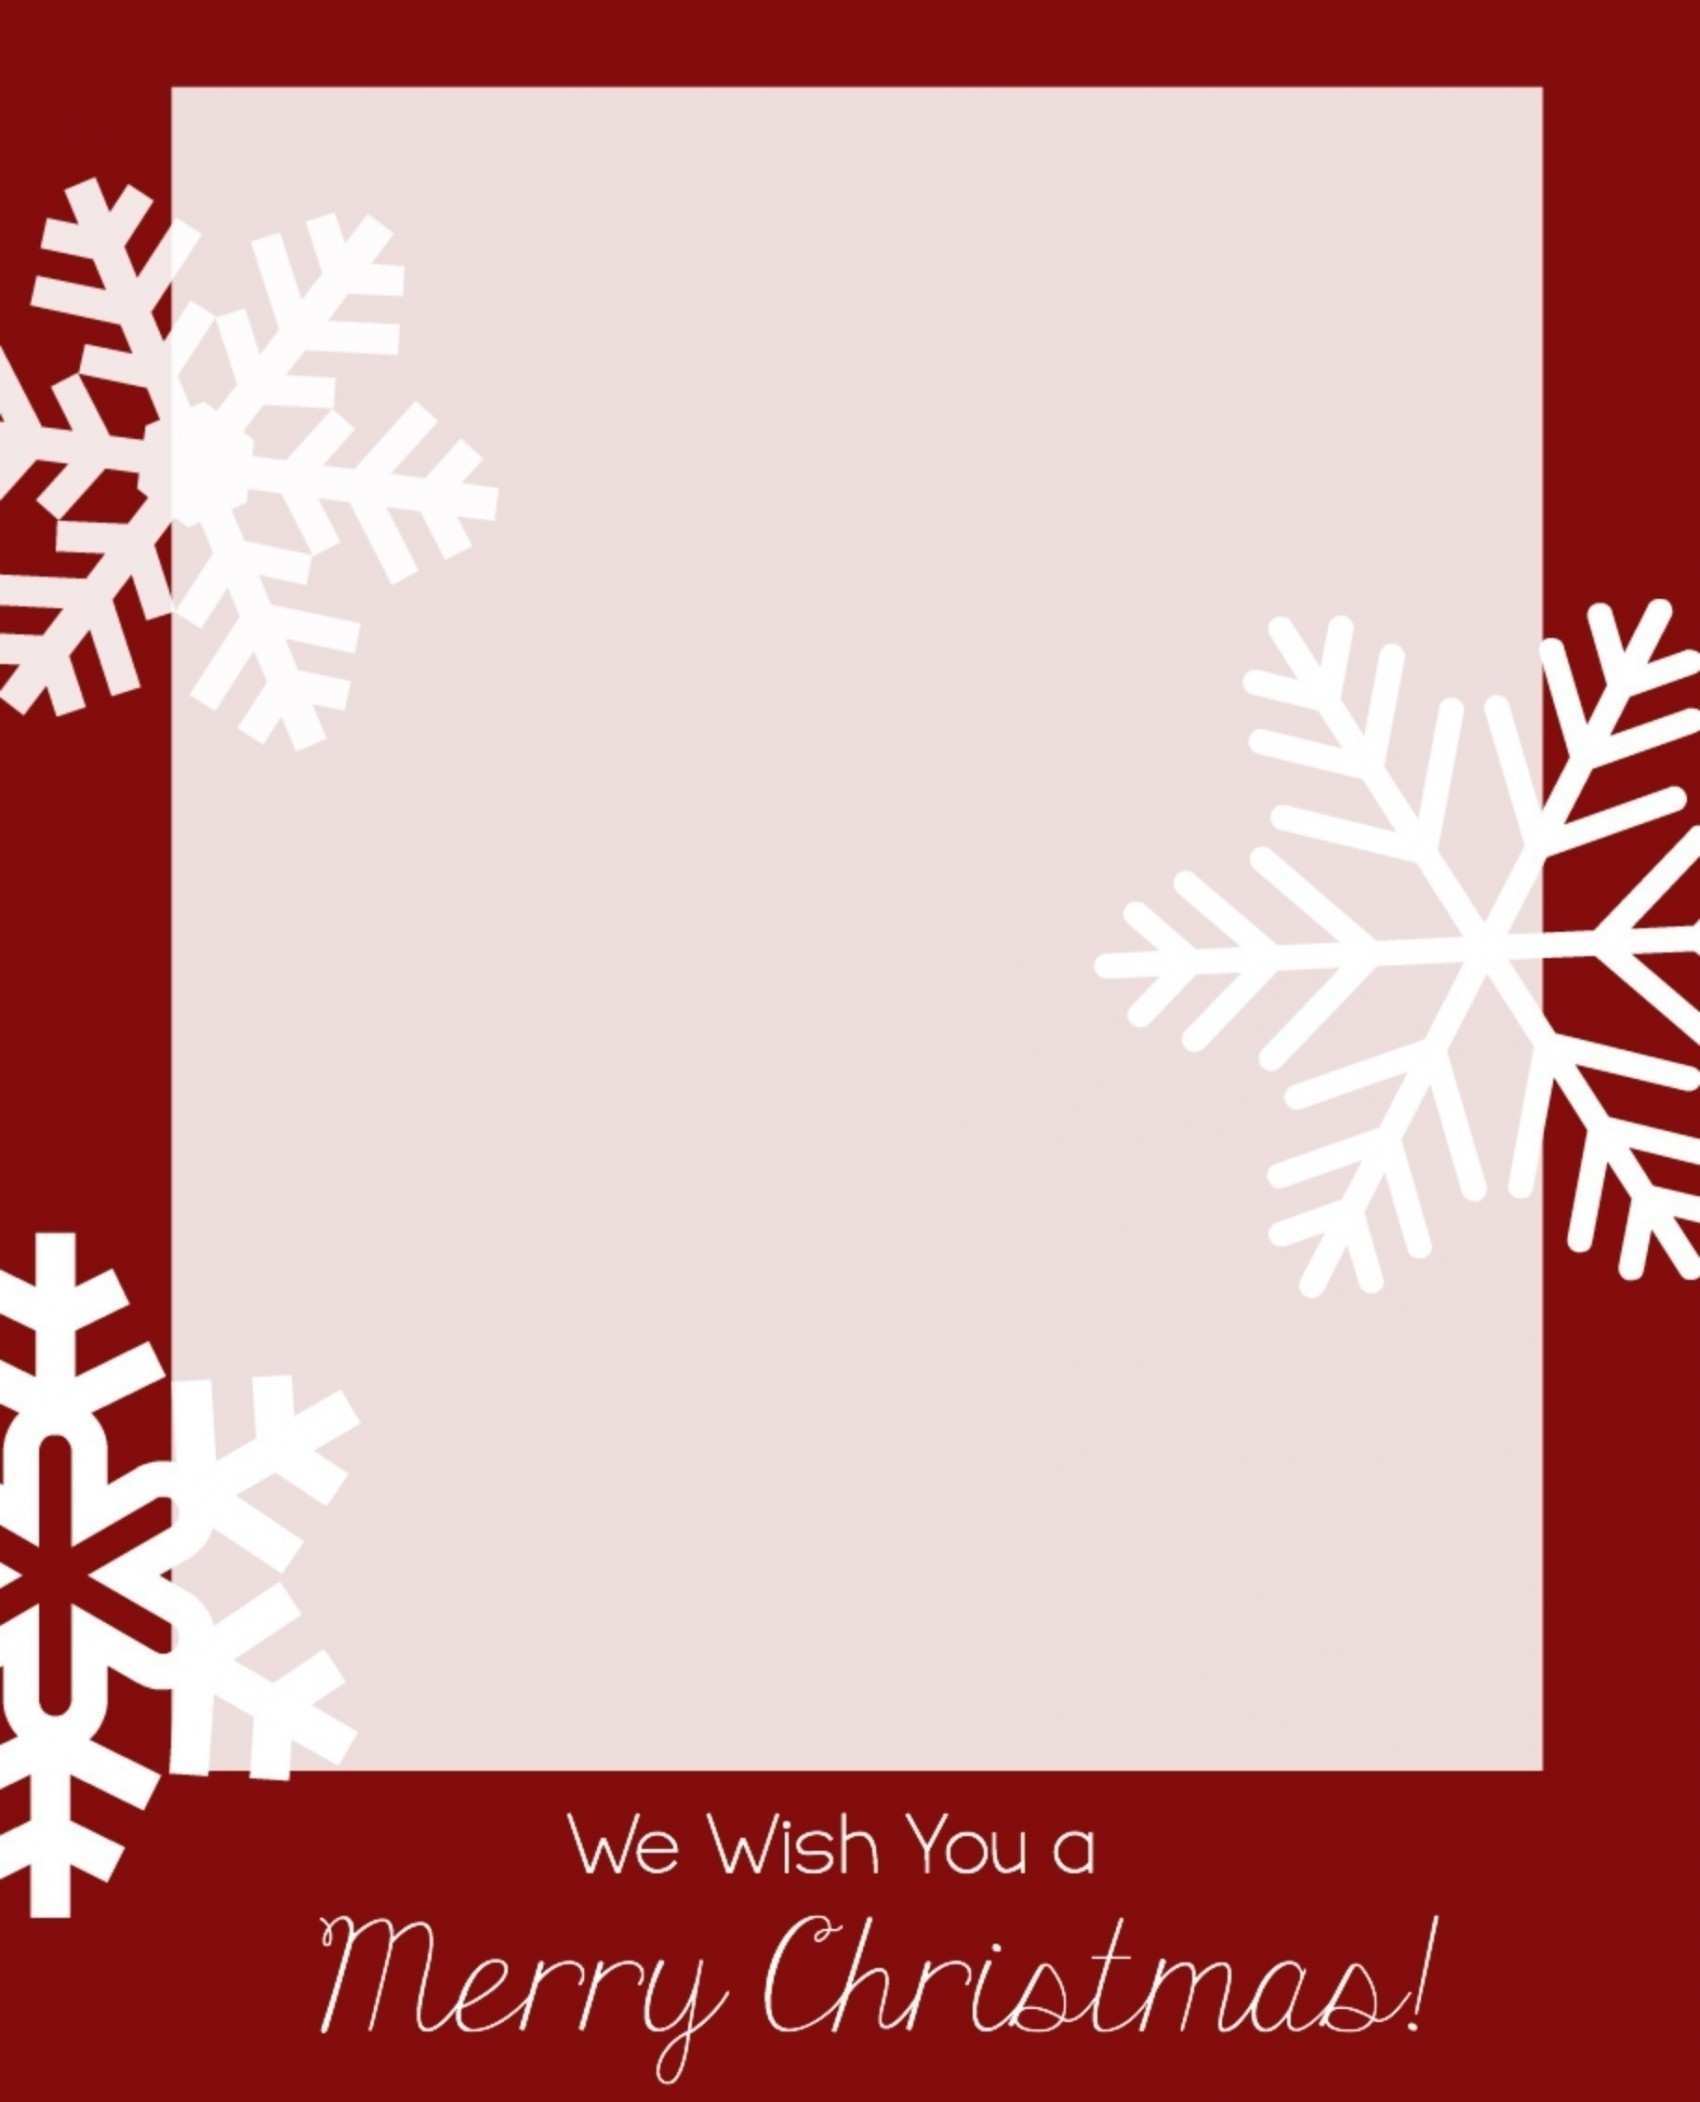 65 Report Christmas Card Template Word 2010 Templates with Christmas Card Template Word 2010